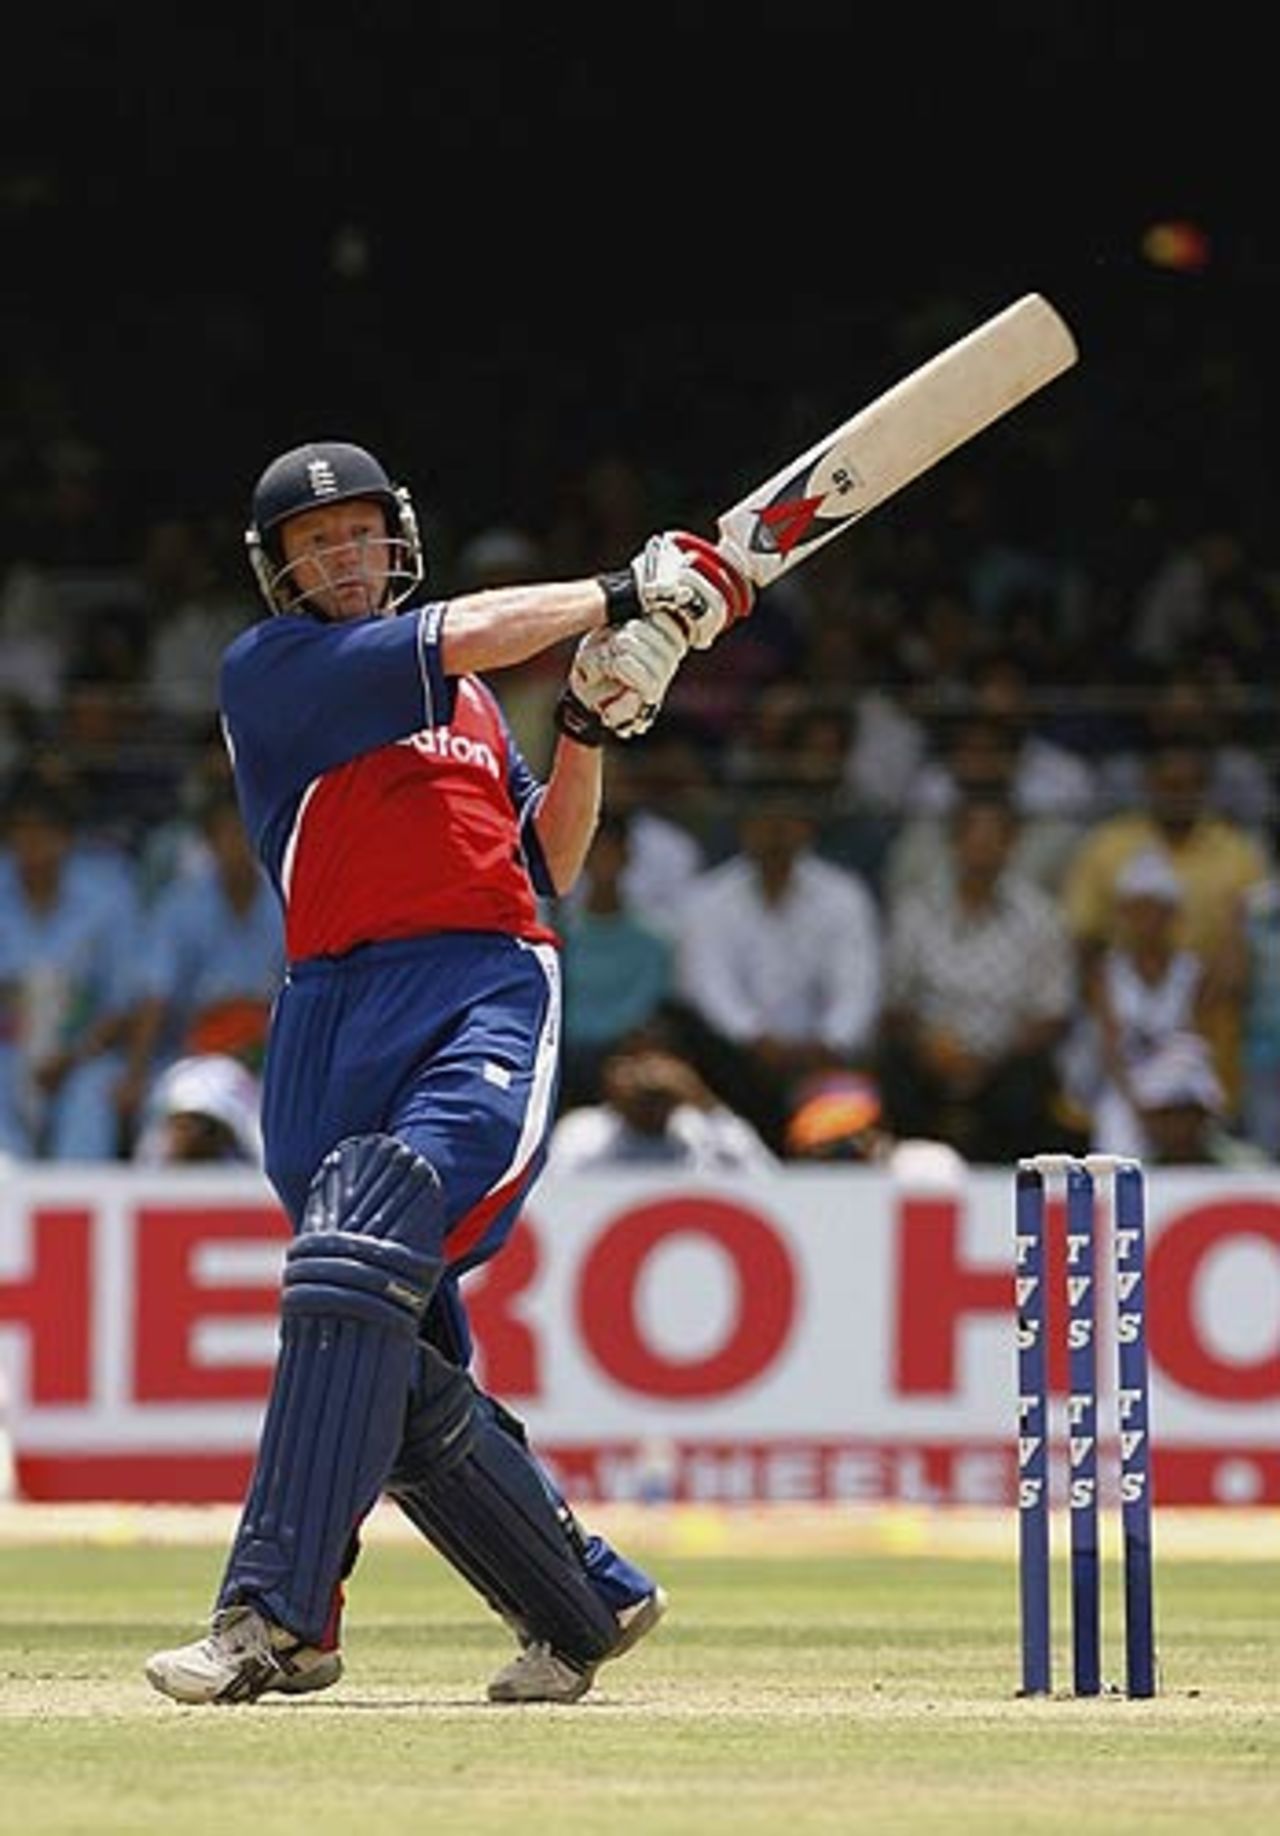 Paul Collingwood pulls en route to 64, India v England, 7th ODI, Indore, April 15 2006